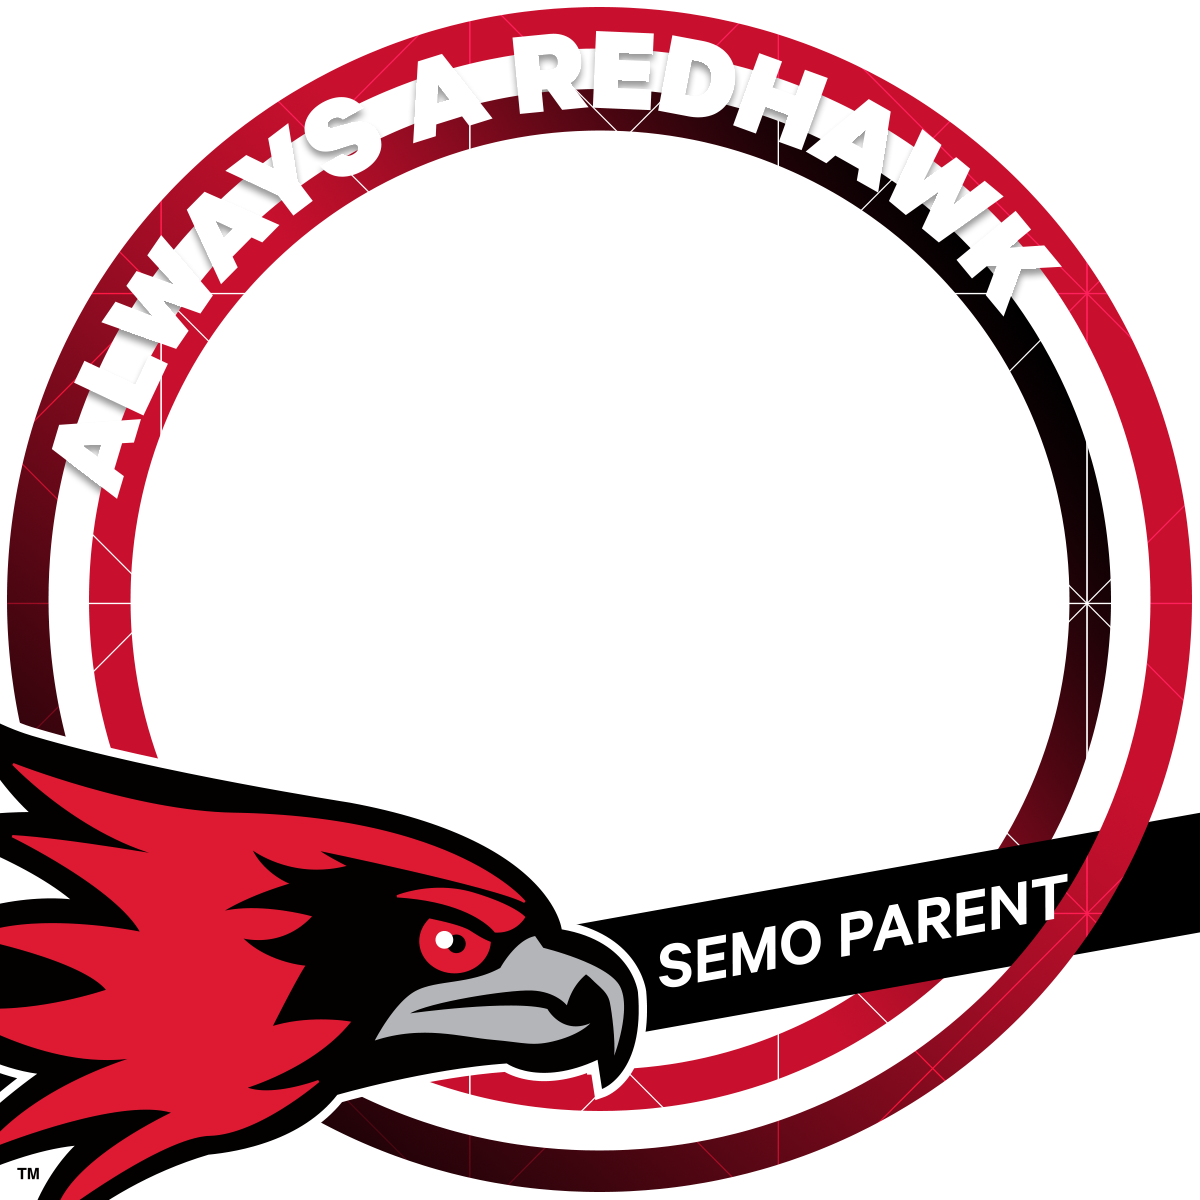 "Always a Redhawk" circular frame with the Redhawk logo in the bottom left corner and "SEMO Parent" in the bottom right